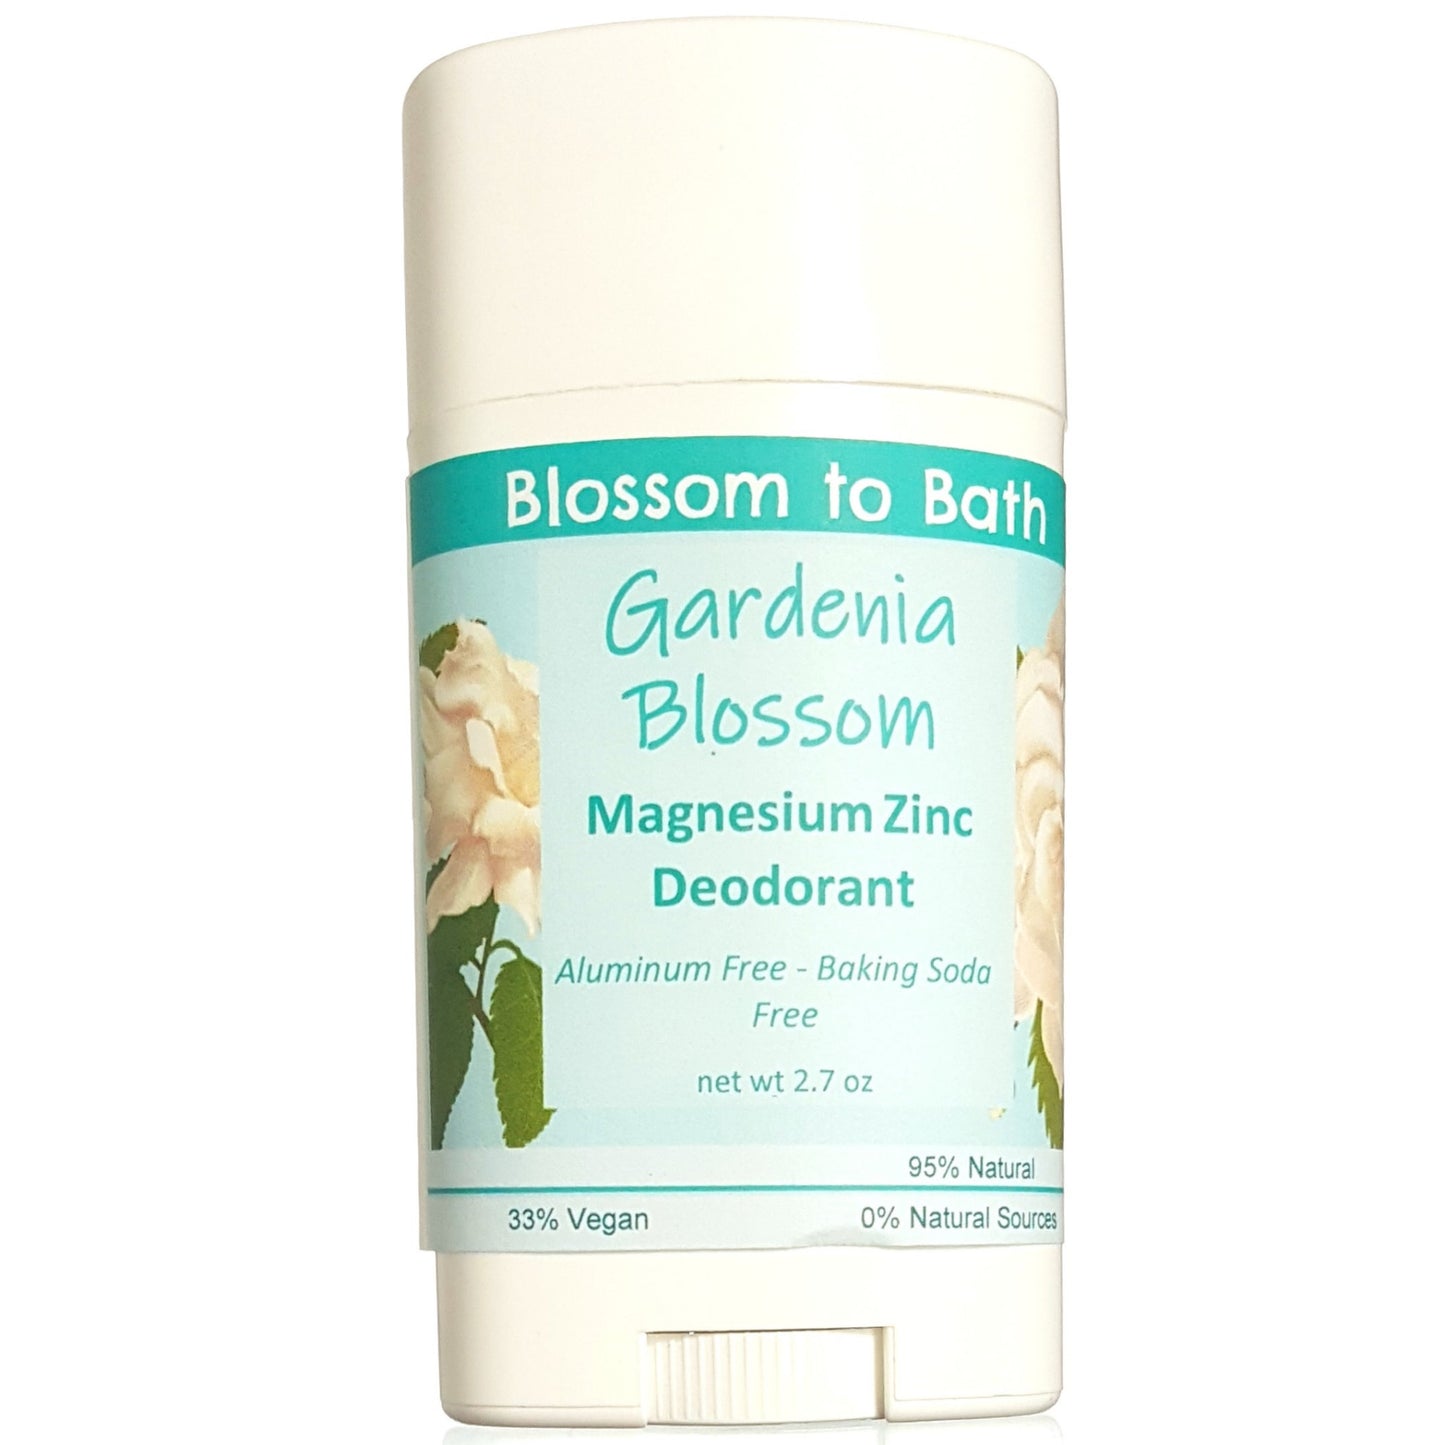 Buy Blossom to Bath Gardenia Blossom Magnesium Zinc Deodorant from Flowersong Soap Studio.  Long lasting protection made from organic botanicals and butters, made without baking soda, tested in the Arizona heat  Sweet Gardenia in a puff of blooming summer flowers